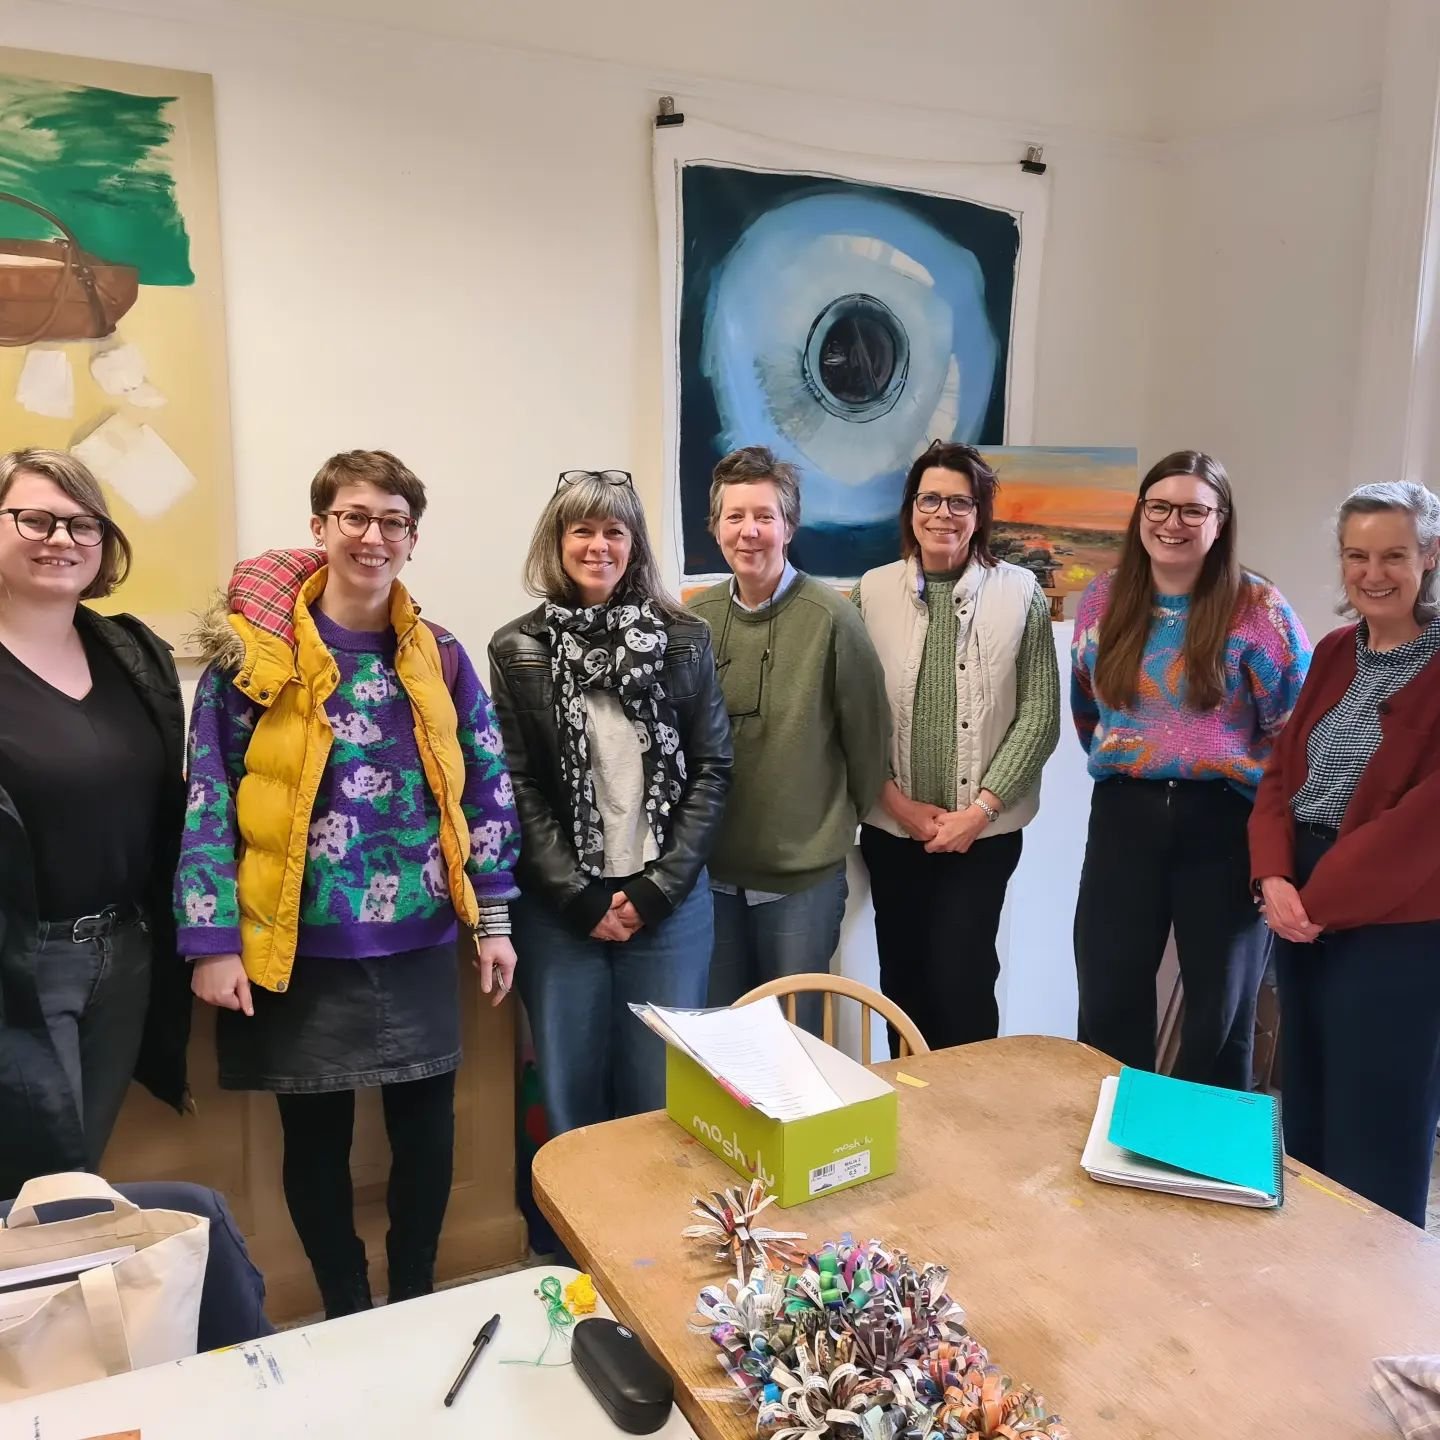 Look out for some awesome courses and workshops coming your way from these lovely people! Thank you to everyone who signed up for the 2 Teaching Skills Workshops run from @ayreshousestudios and all your lovely feedback. If their Micro Teaching Sessio